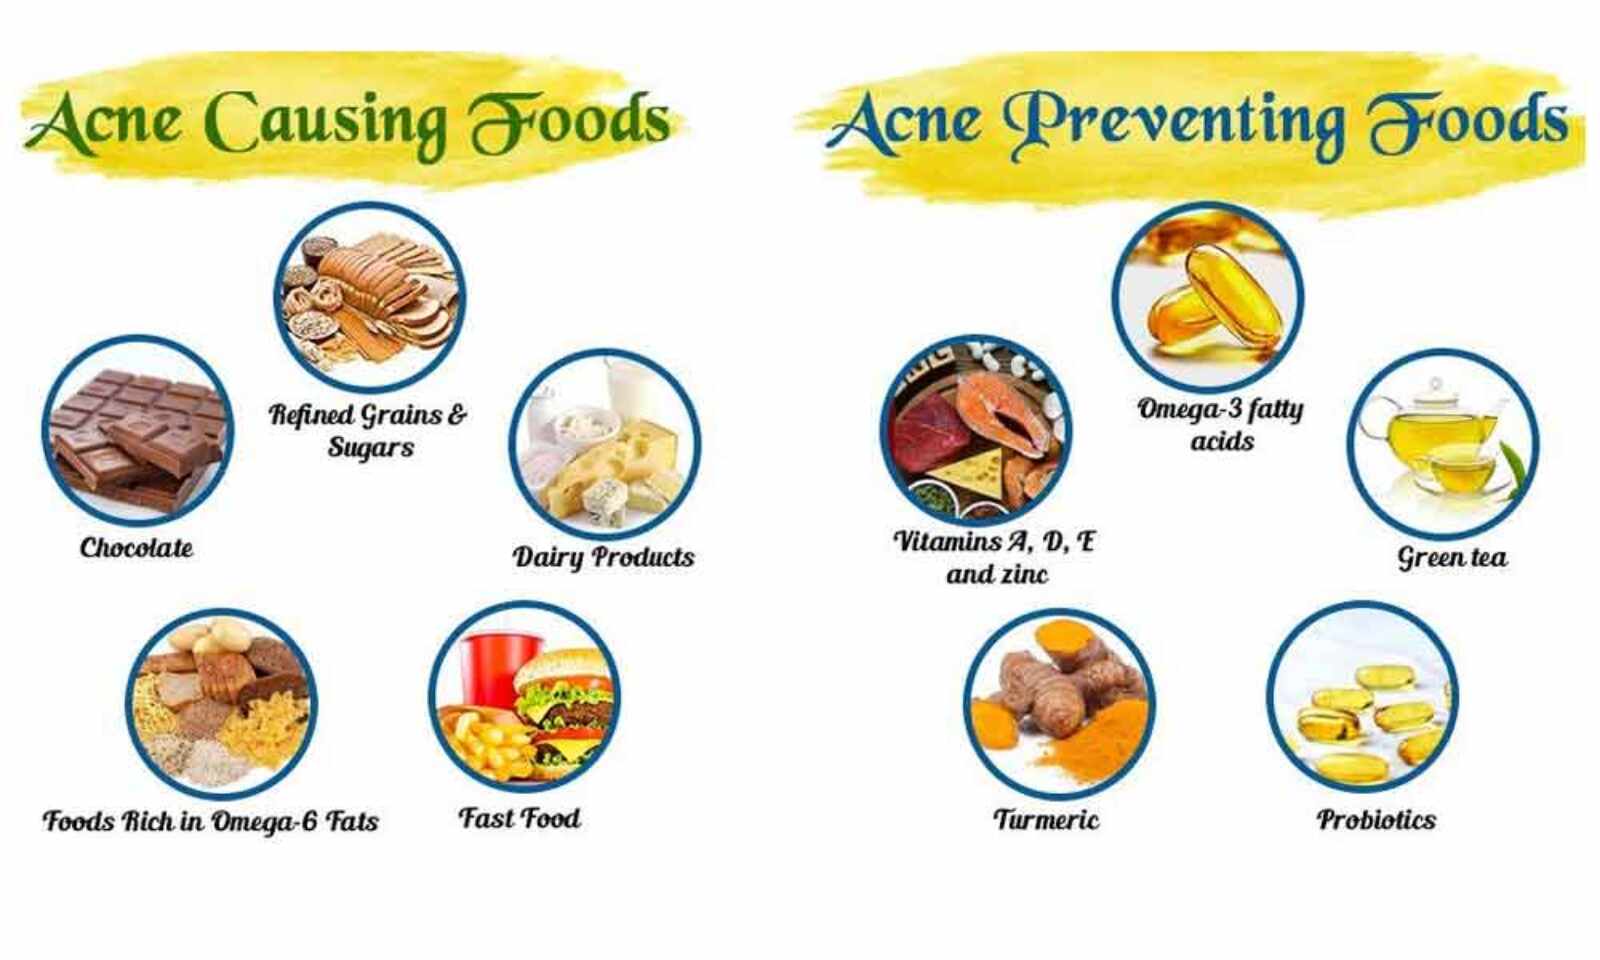 How Healthy Diet can help Prevent Acne and Promote Clear Skin?